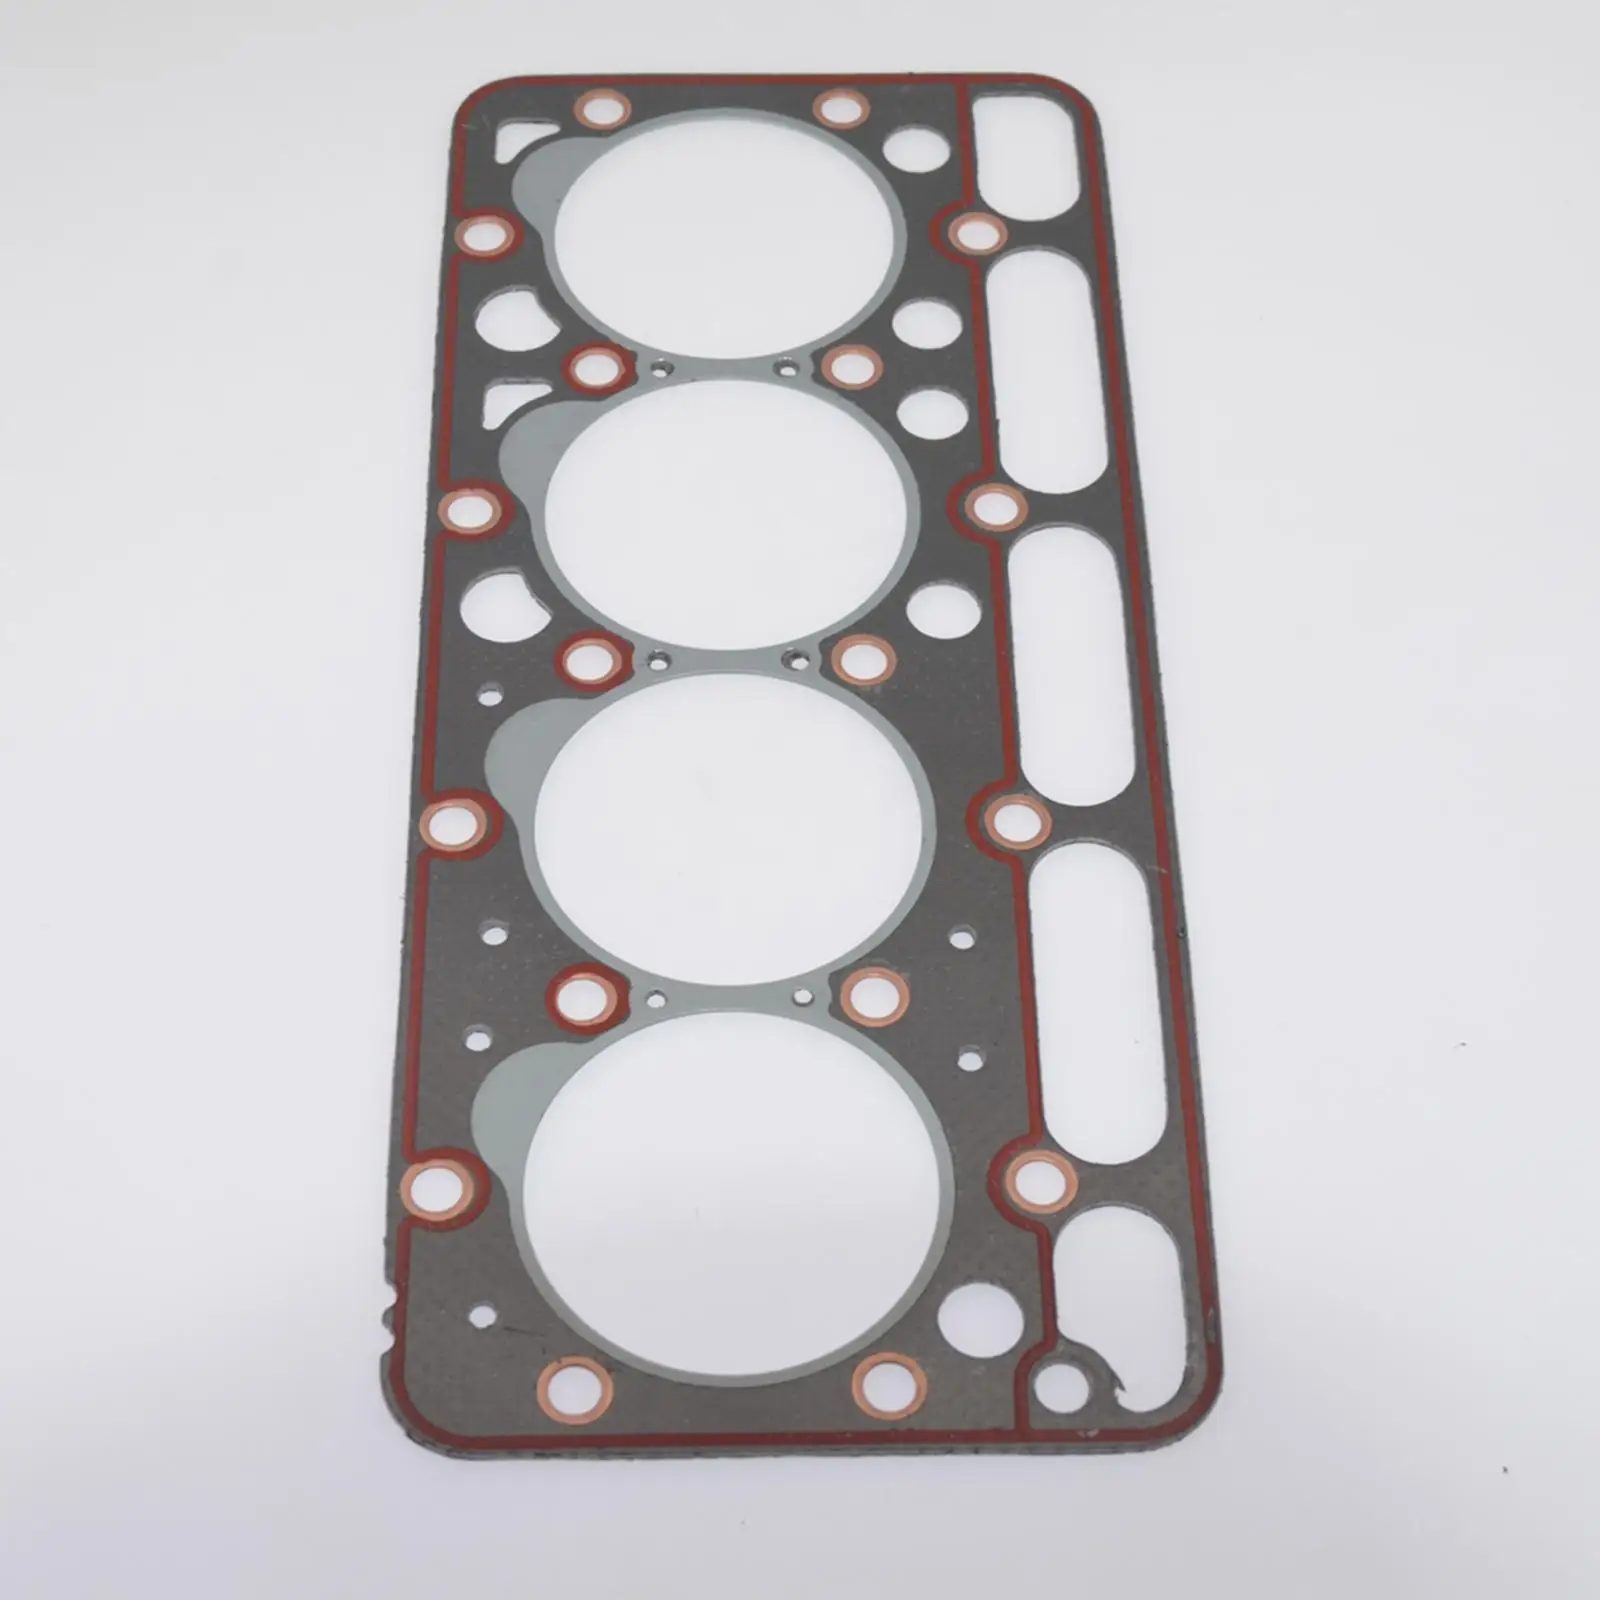 19077-03310 Head Gasket Parts Durable Easy to Install for Bobcat